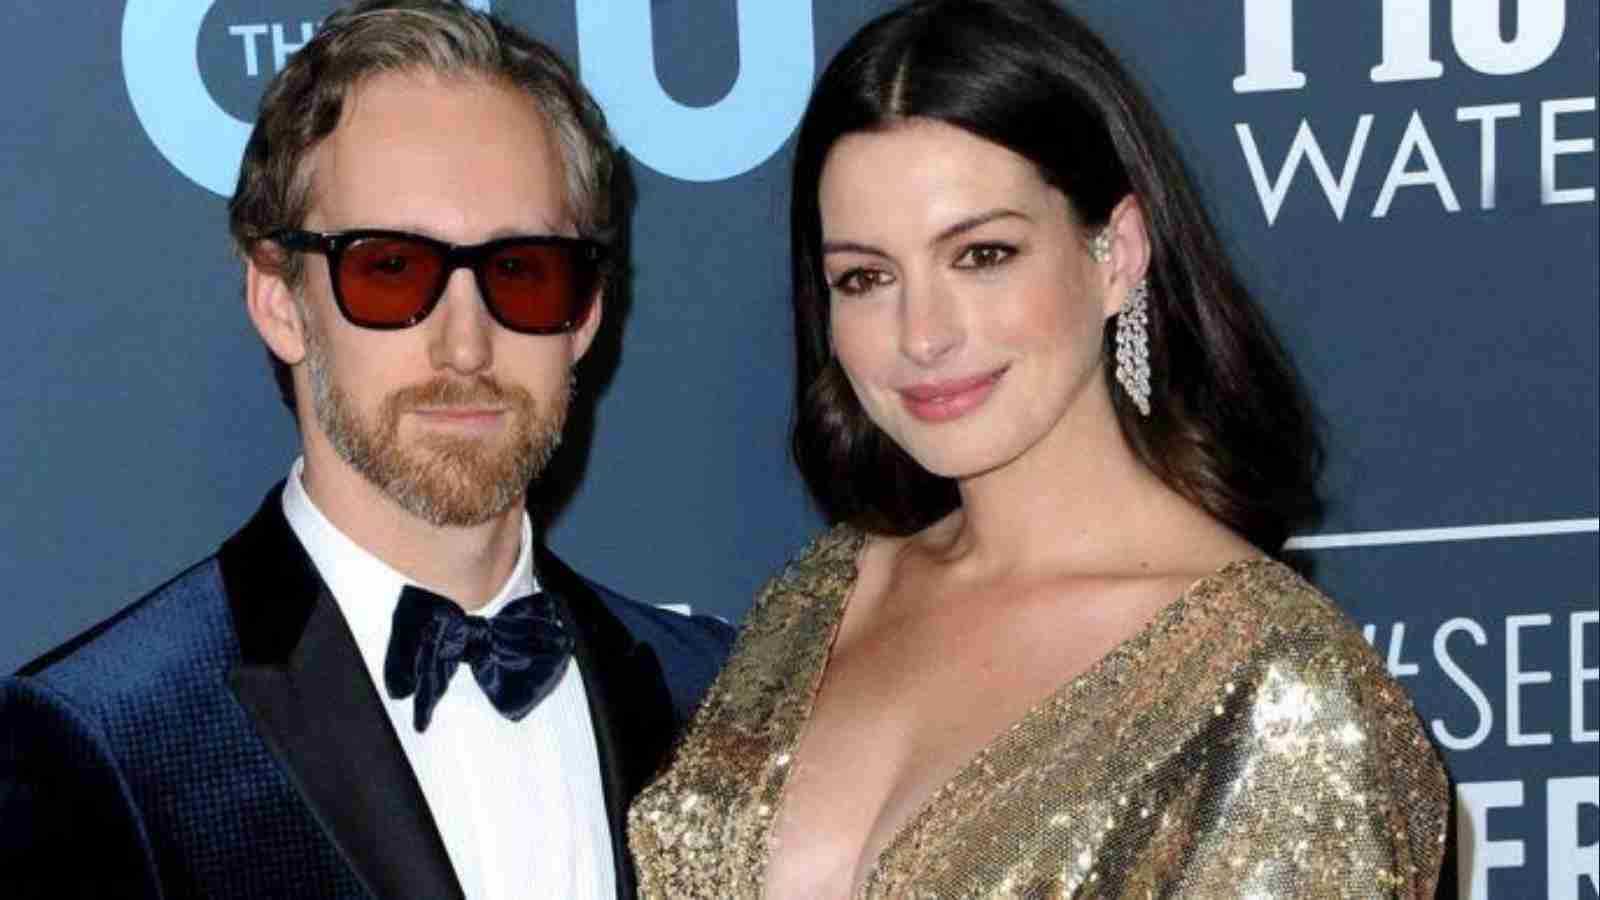 What does Anne Hathaway's husband, Adam Shulman do for a living?